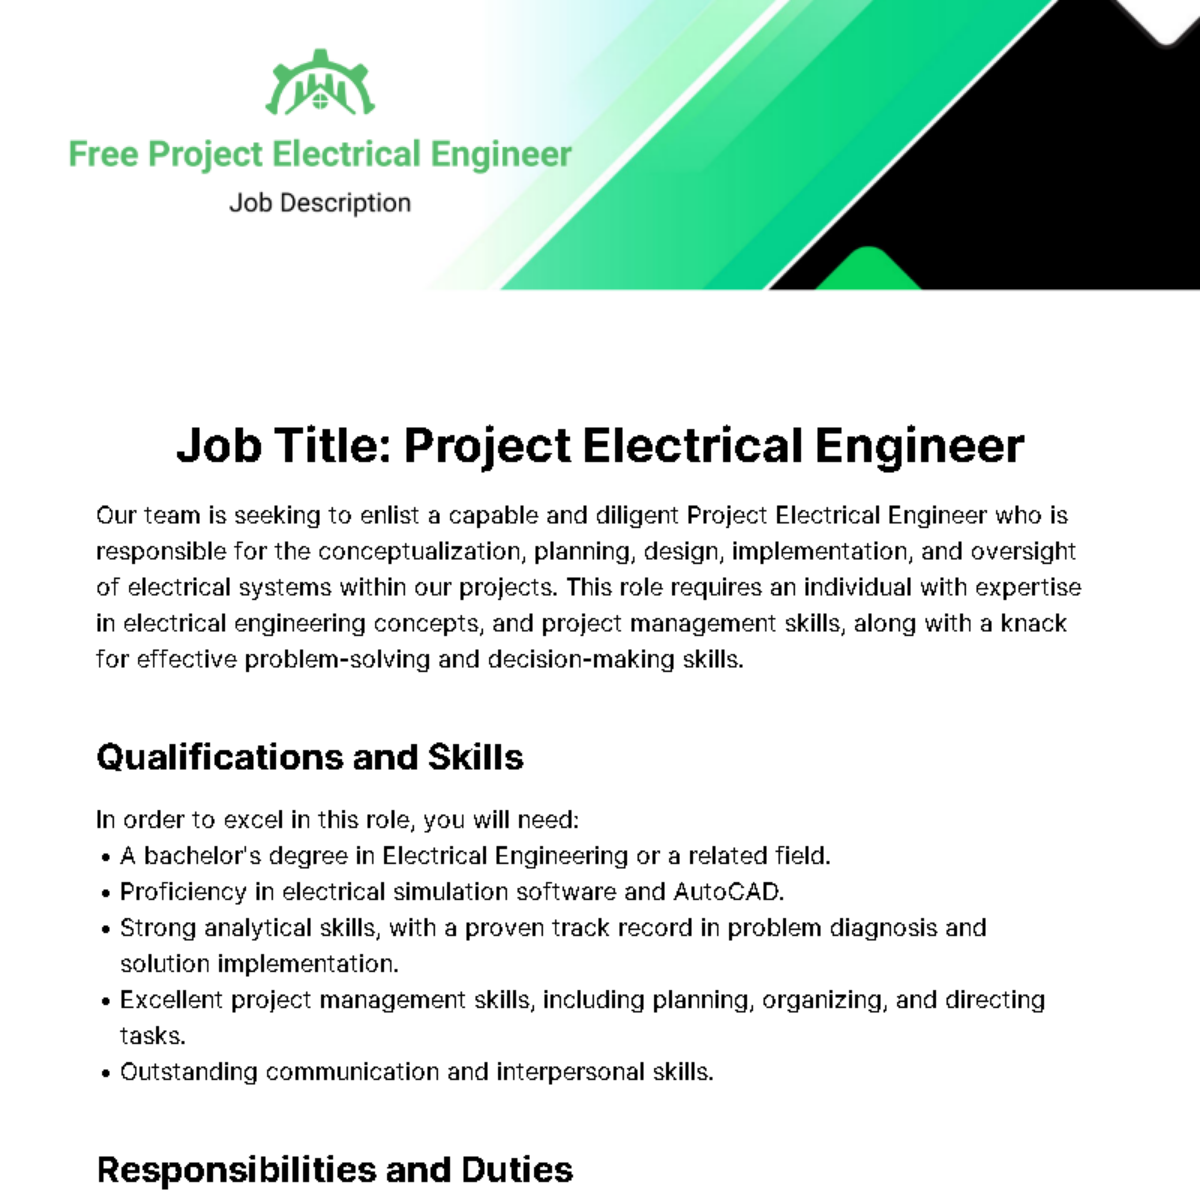 Free Project Electrical Engineer Job Description Template